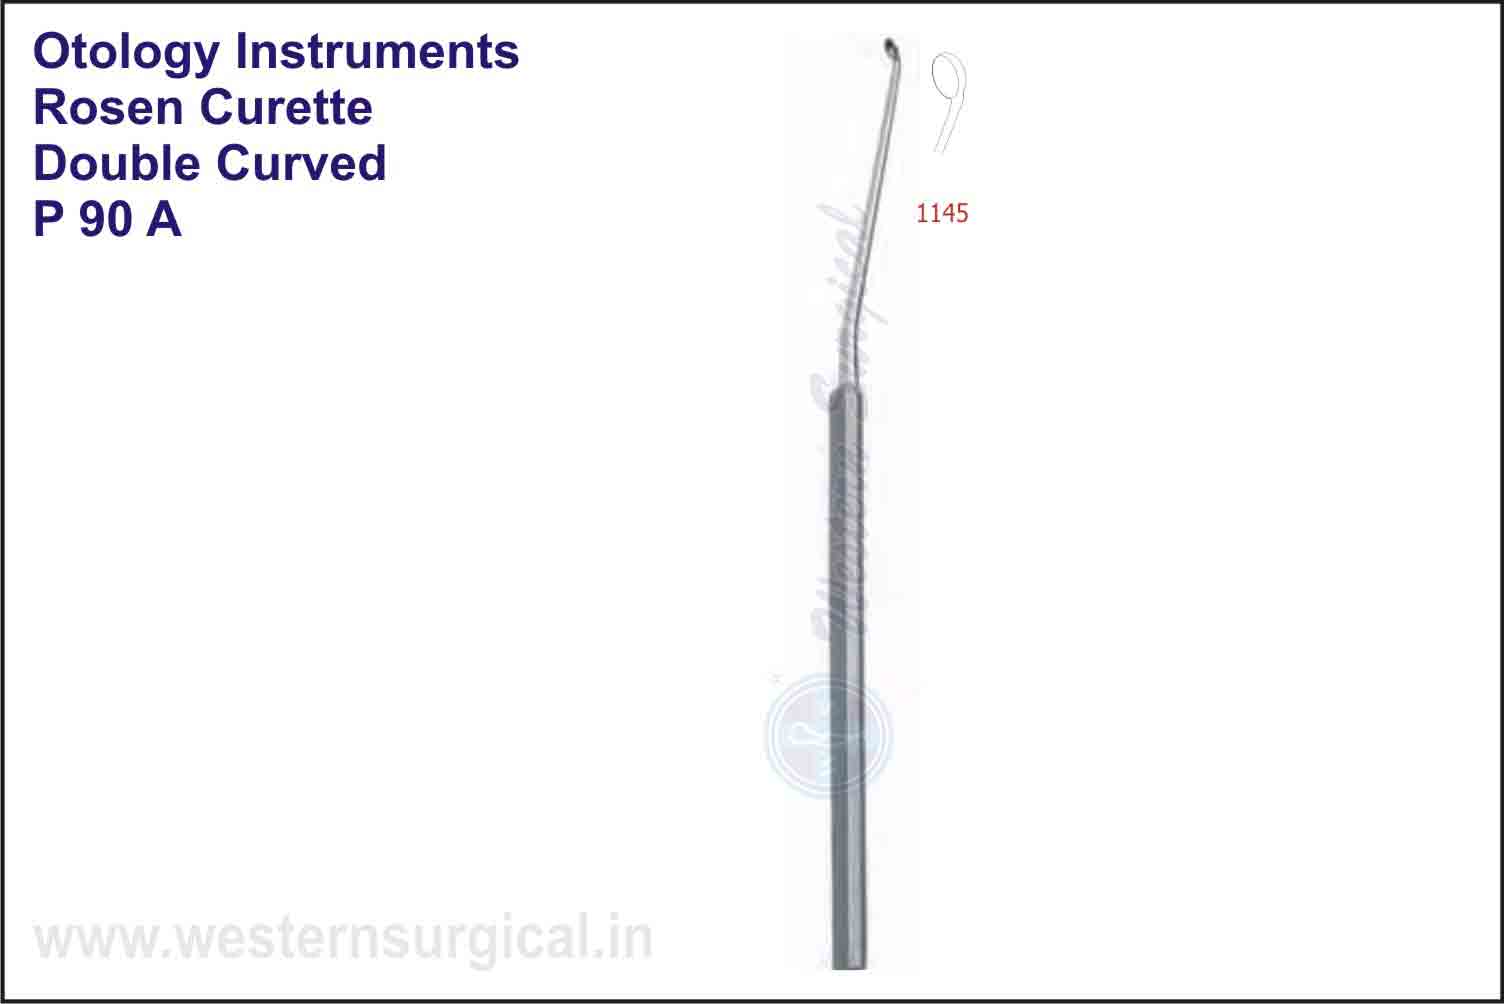 ROSEN CURETTE DOUBLE CURVED